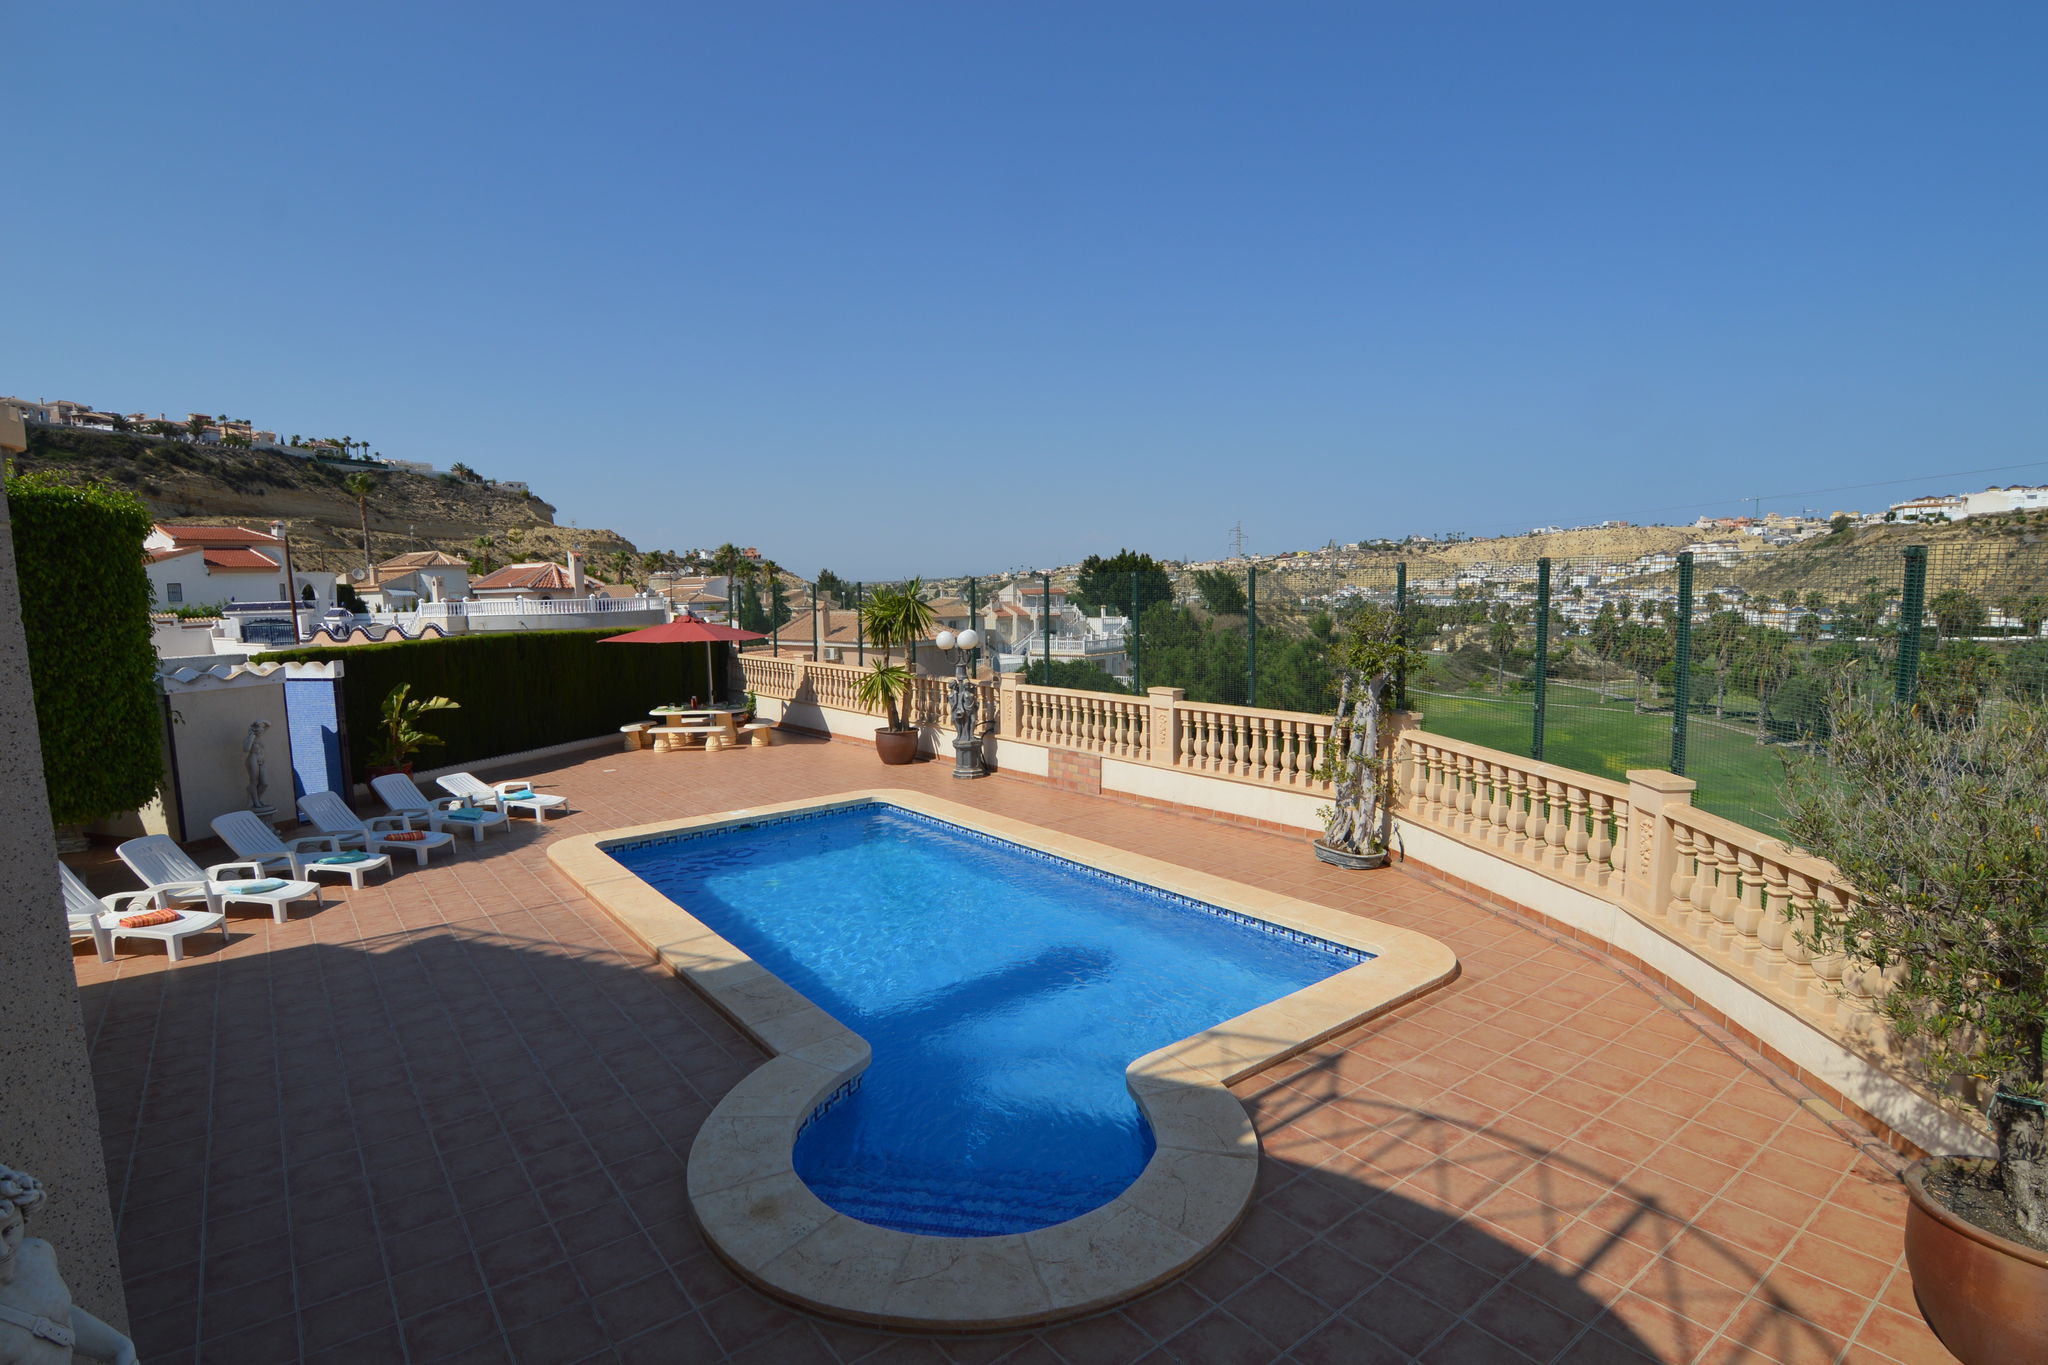 Detached villa with a swimming pool and amazing view of the La Marquesa golf course